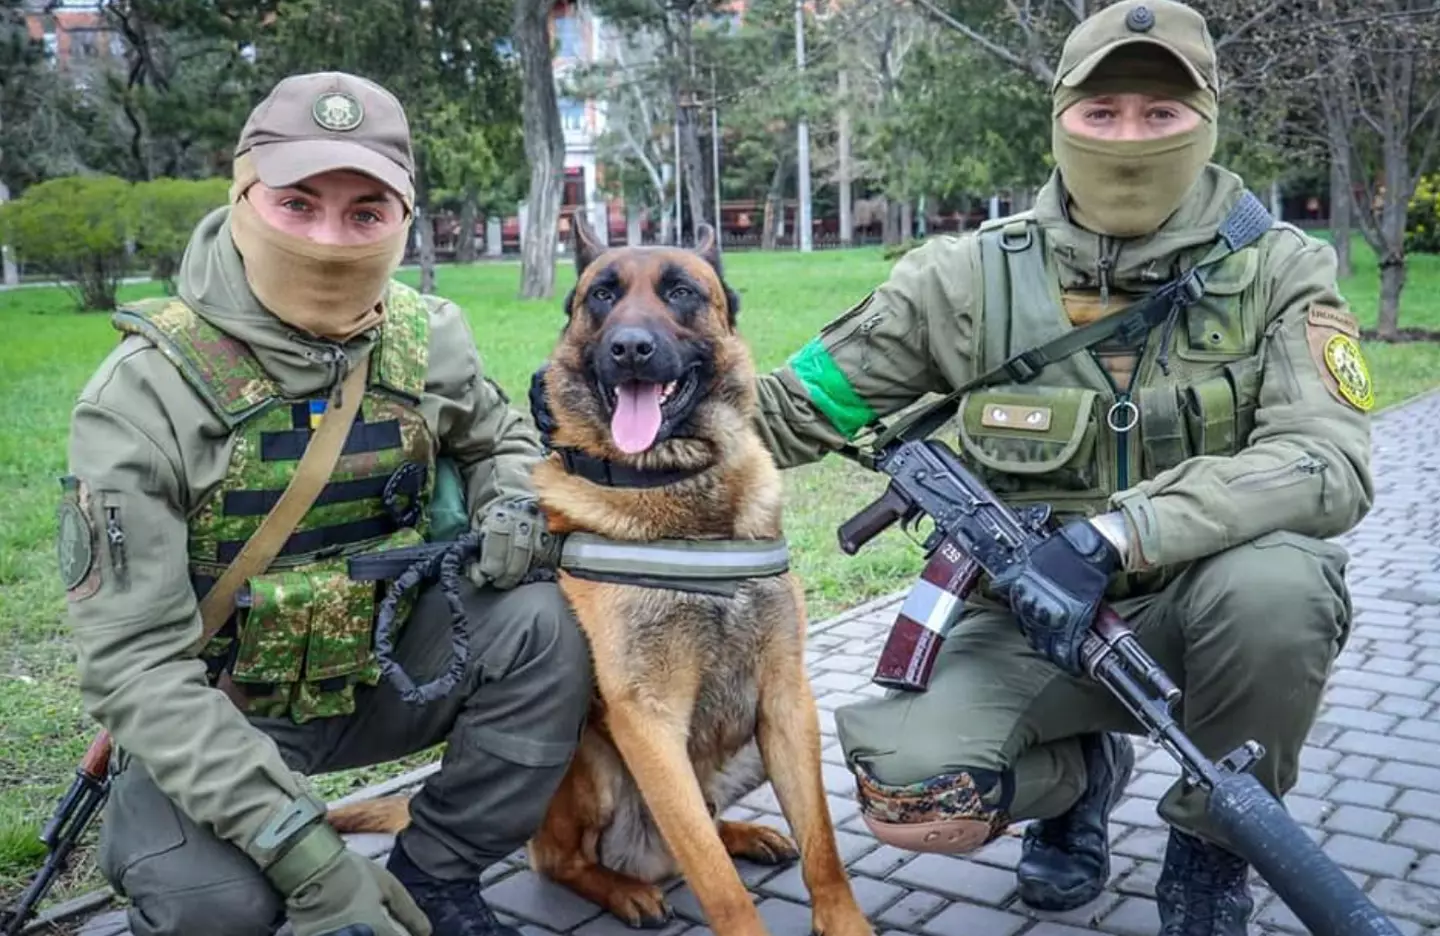 A dog abandoned by Russians has swapped sides in the war.